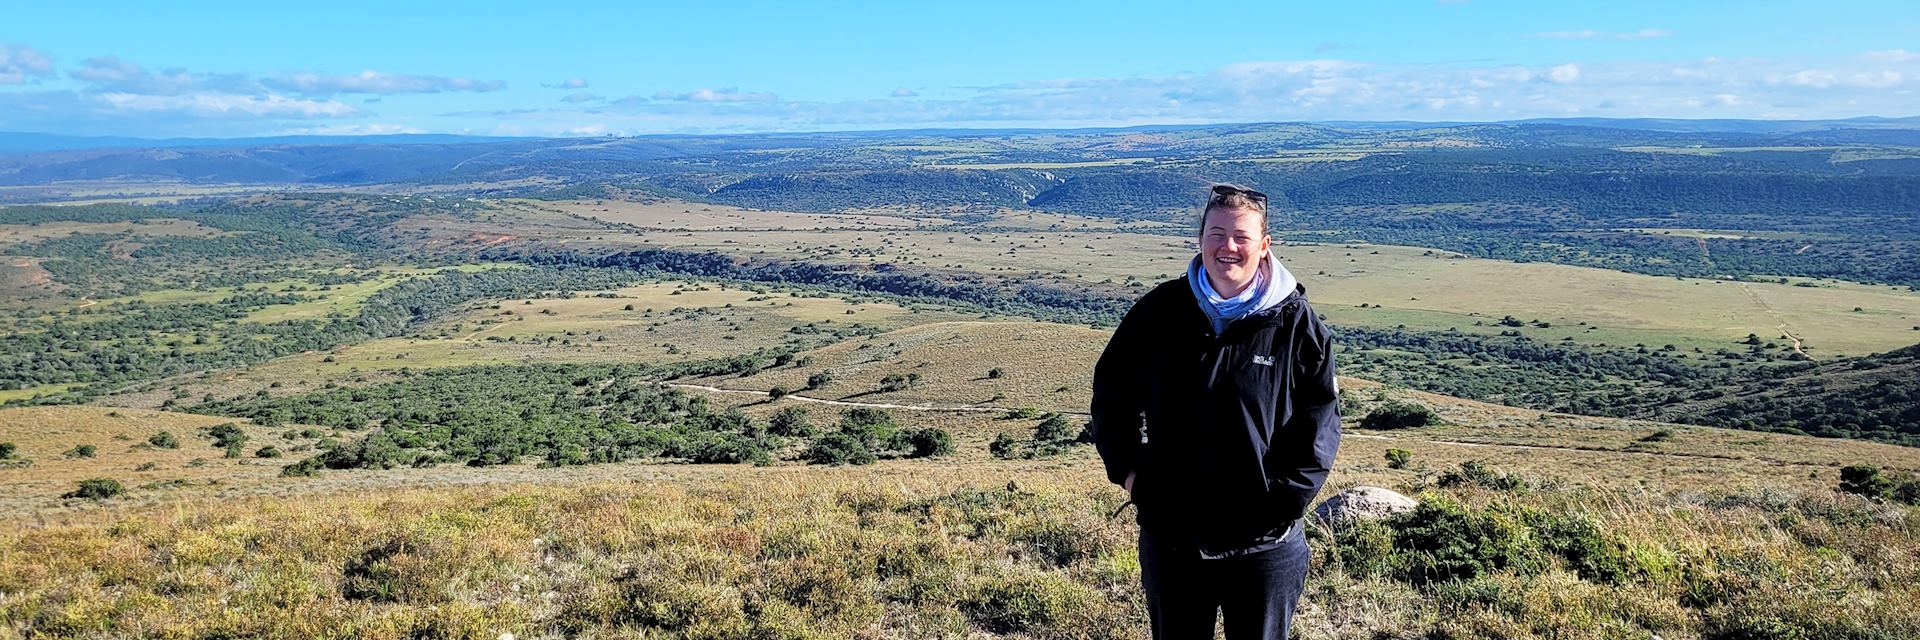 Catherine at Amakhala Game Reserve, South Africa